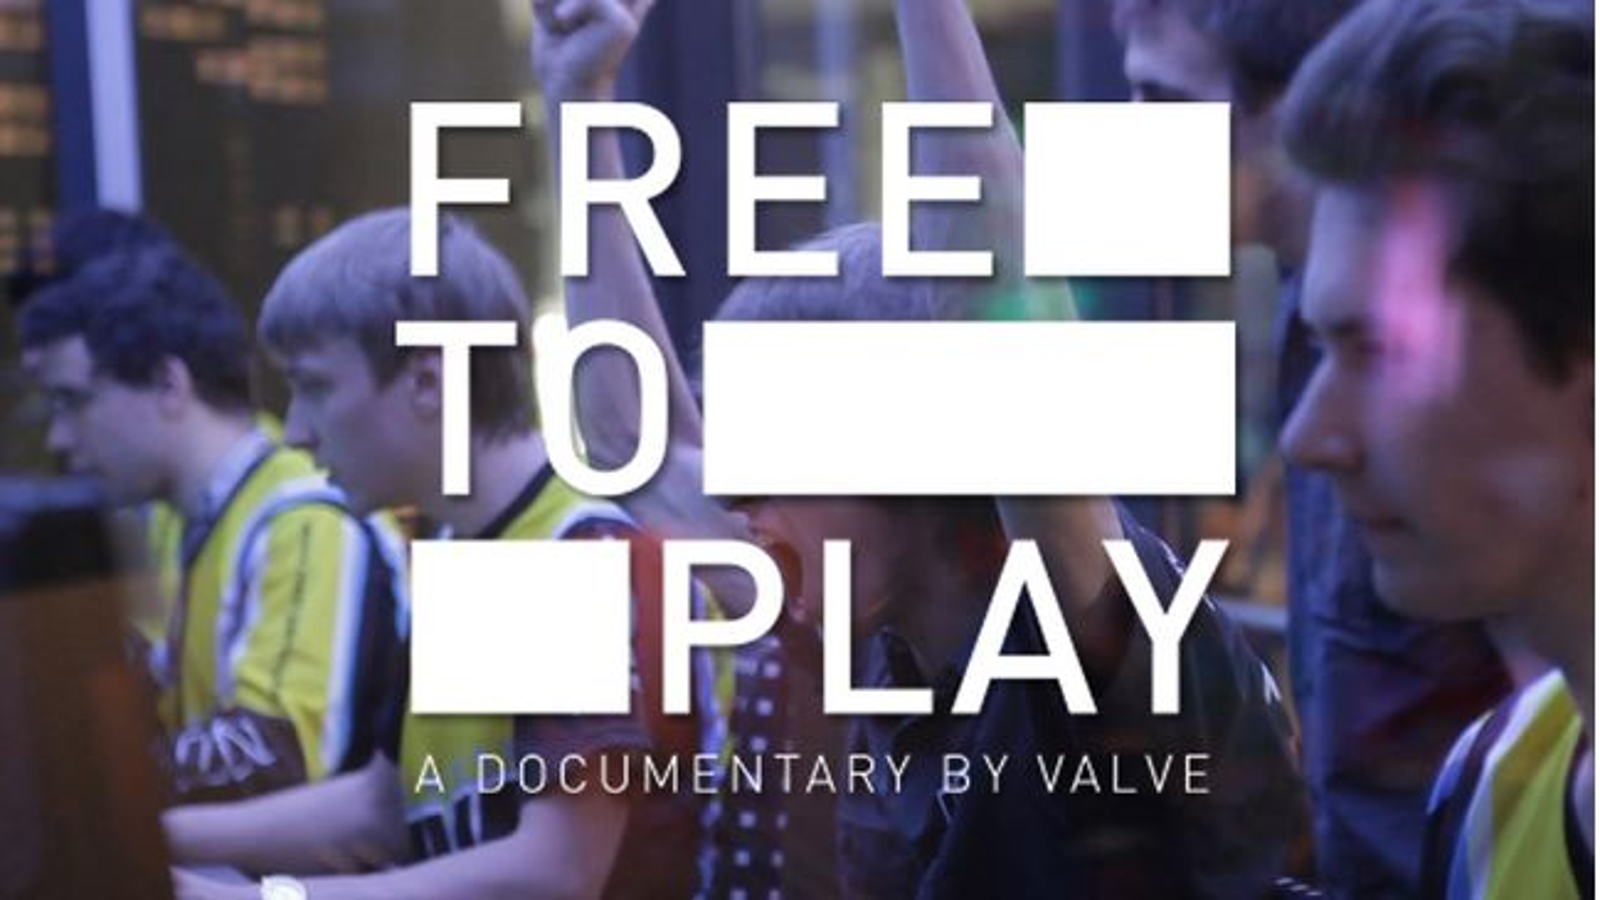 Free To Play, Valve's Dota Documentary, Is Out And Free